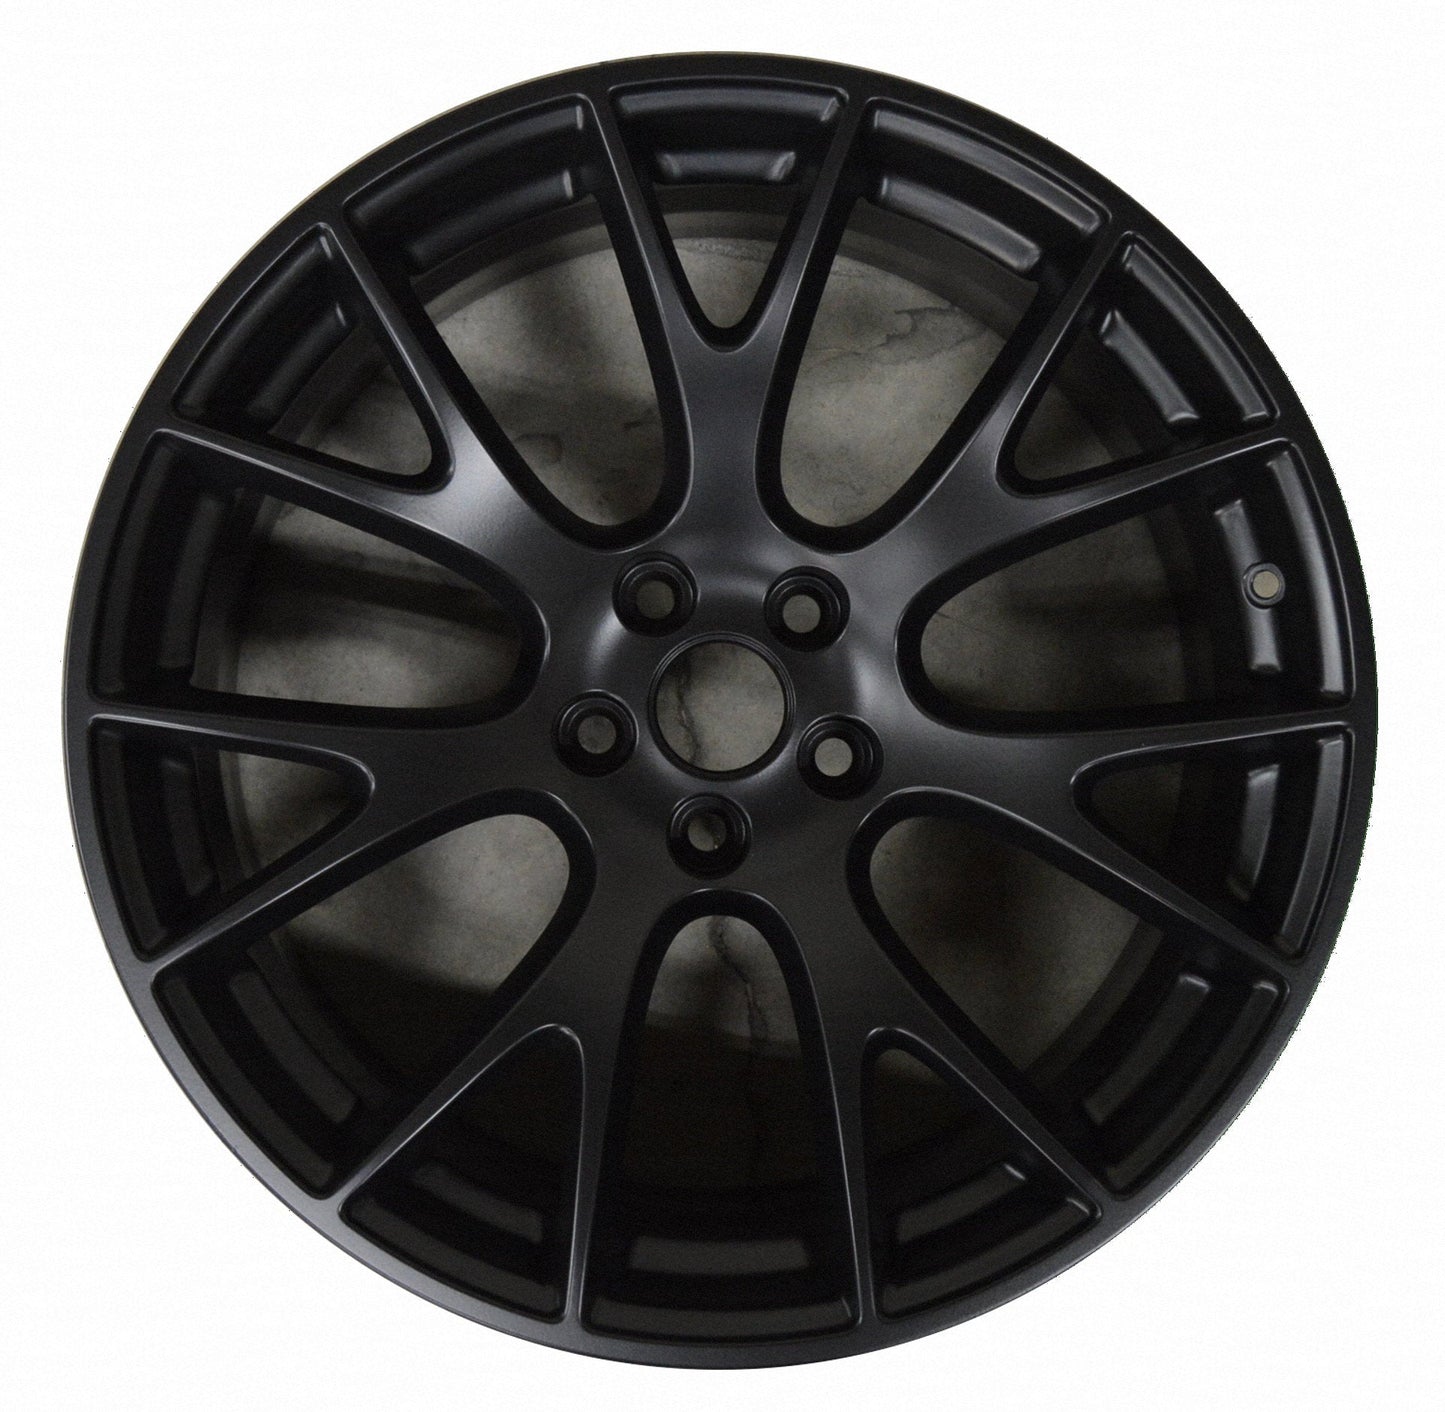 Dodge Charger  2015, 2016, 2017, 2018 Factory OEM Car Wheel Size 20x9.5 Alloy WAO.2528.PB02.FF